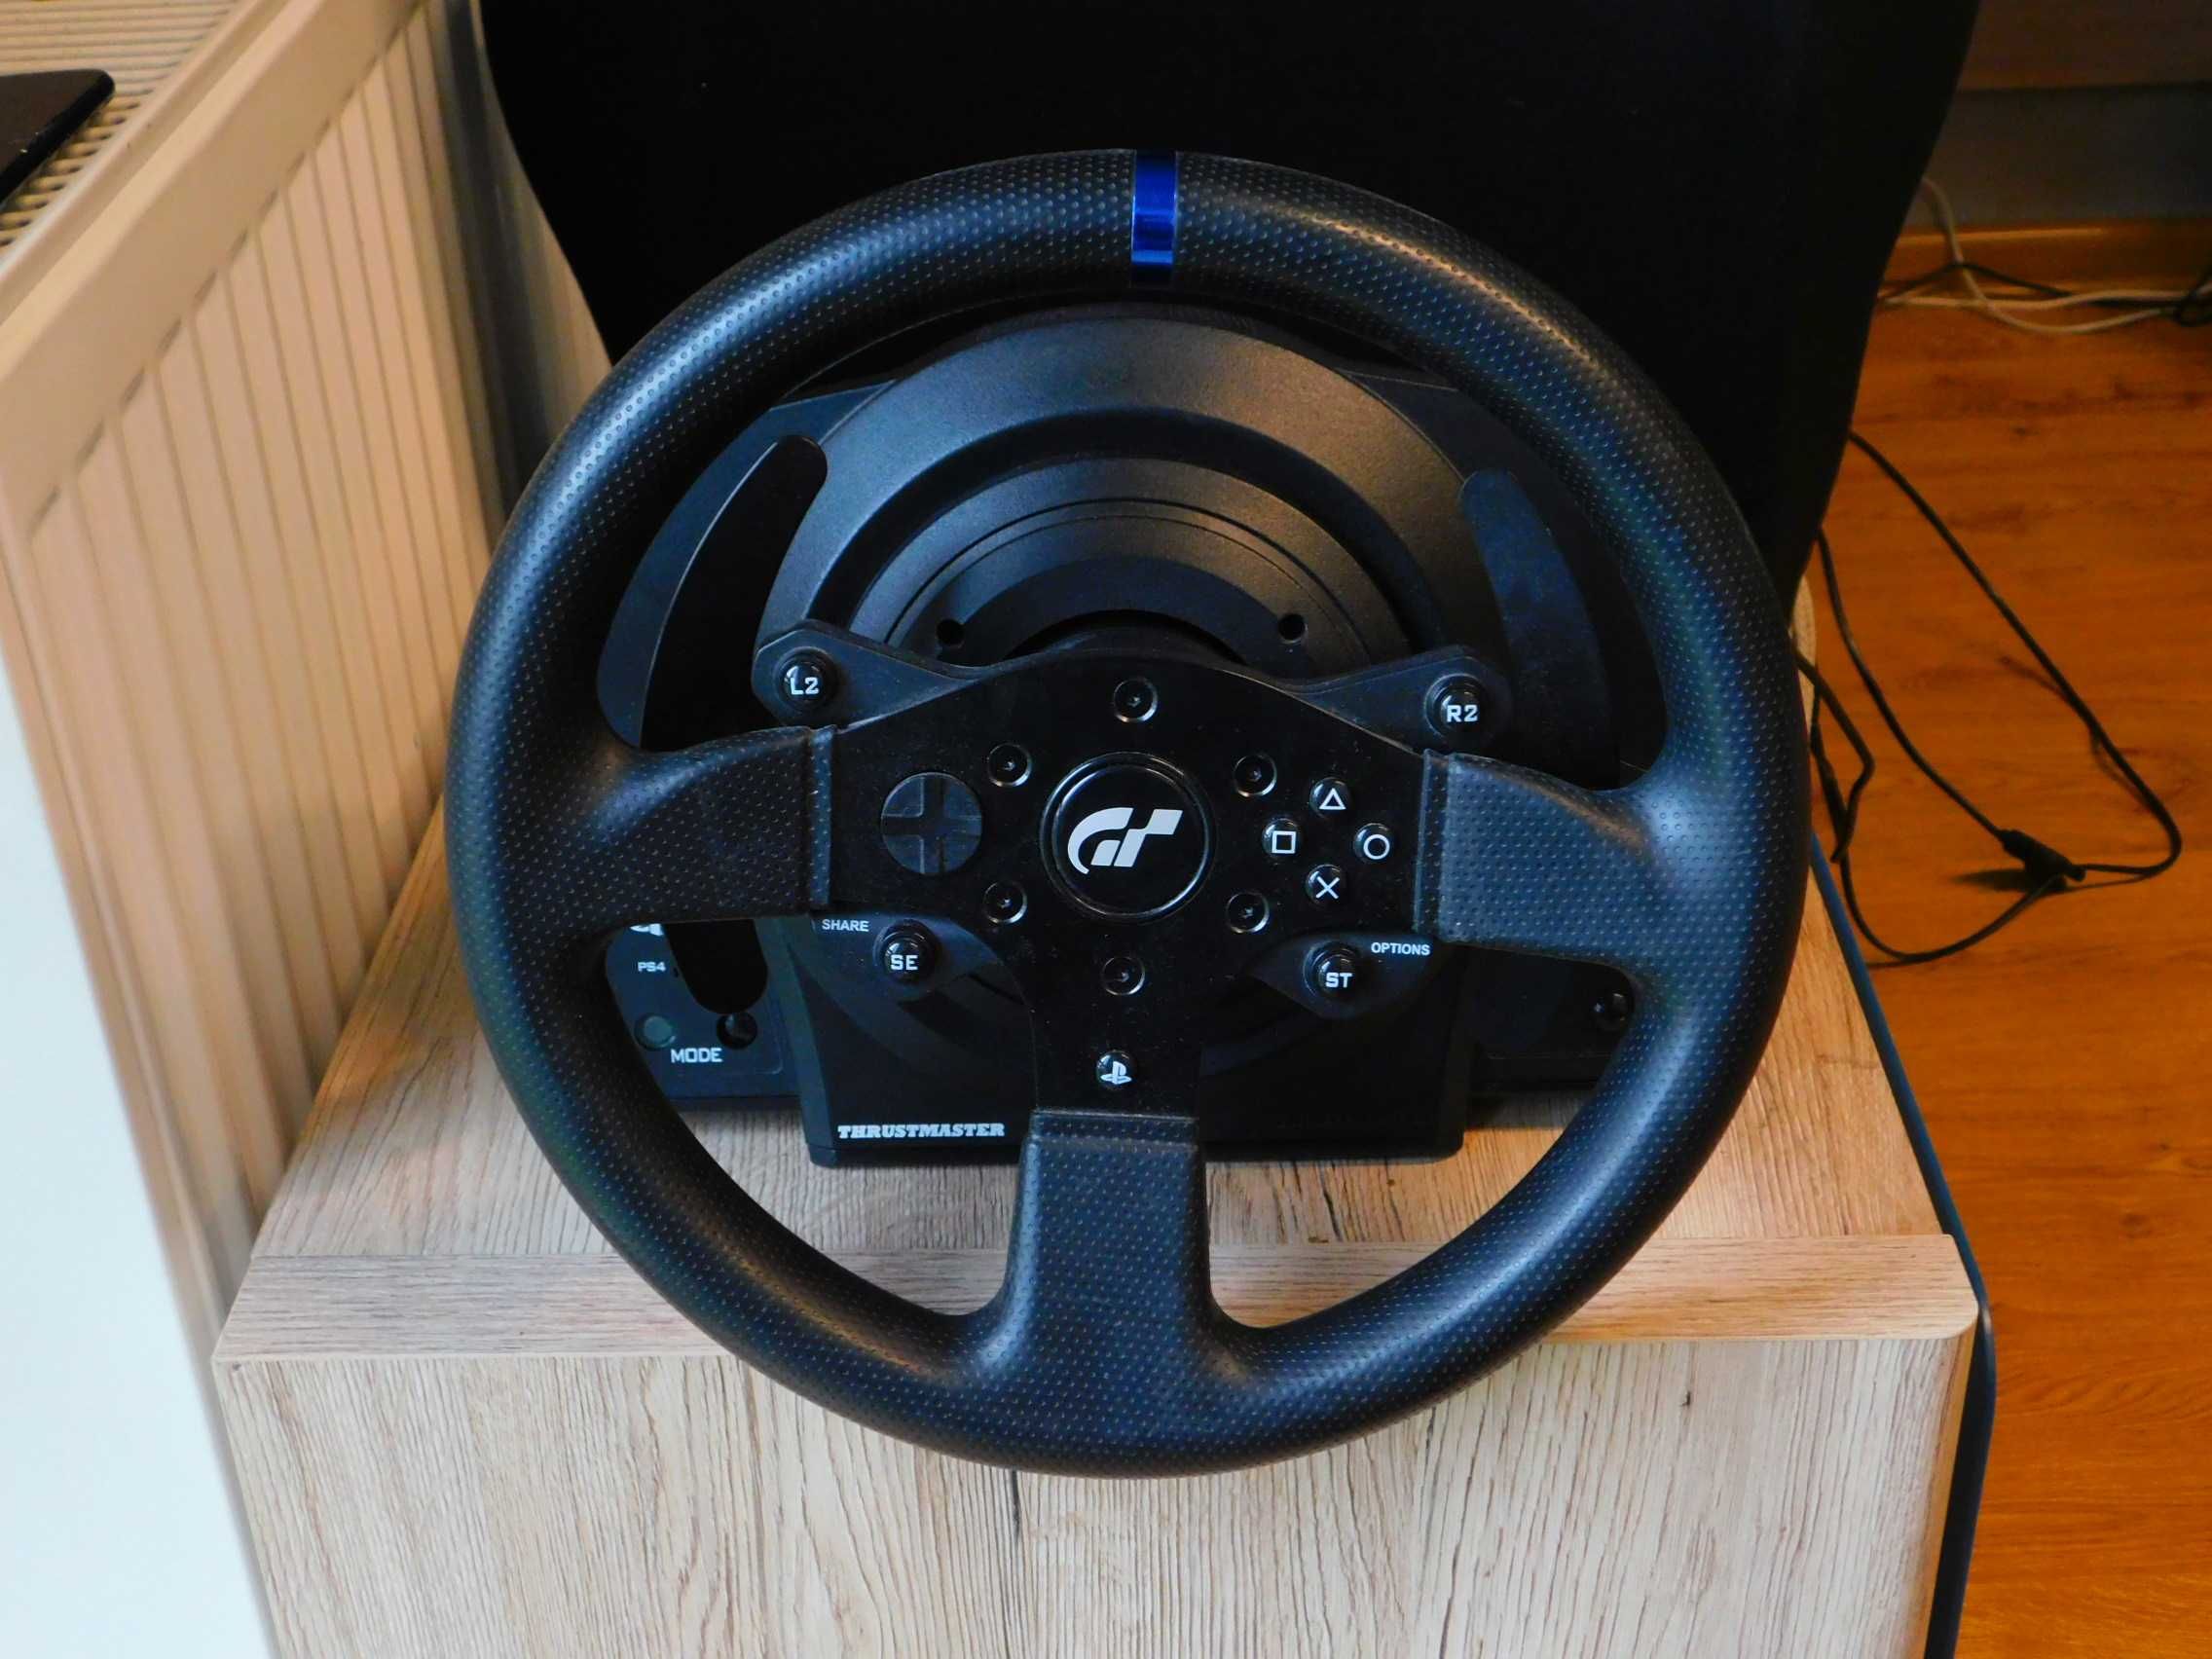 Baza kierownicy do gier Thrustmaster t300 rs